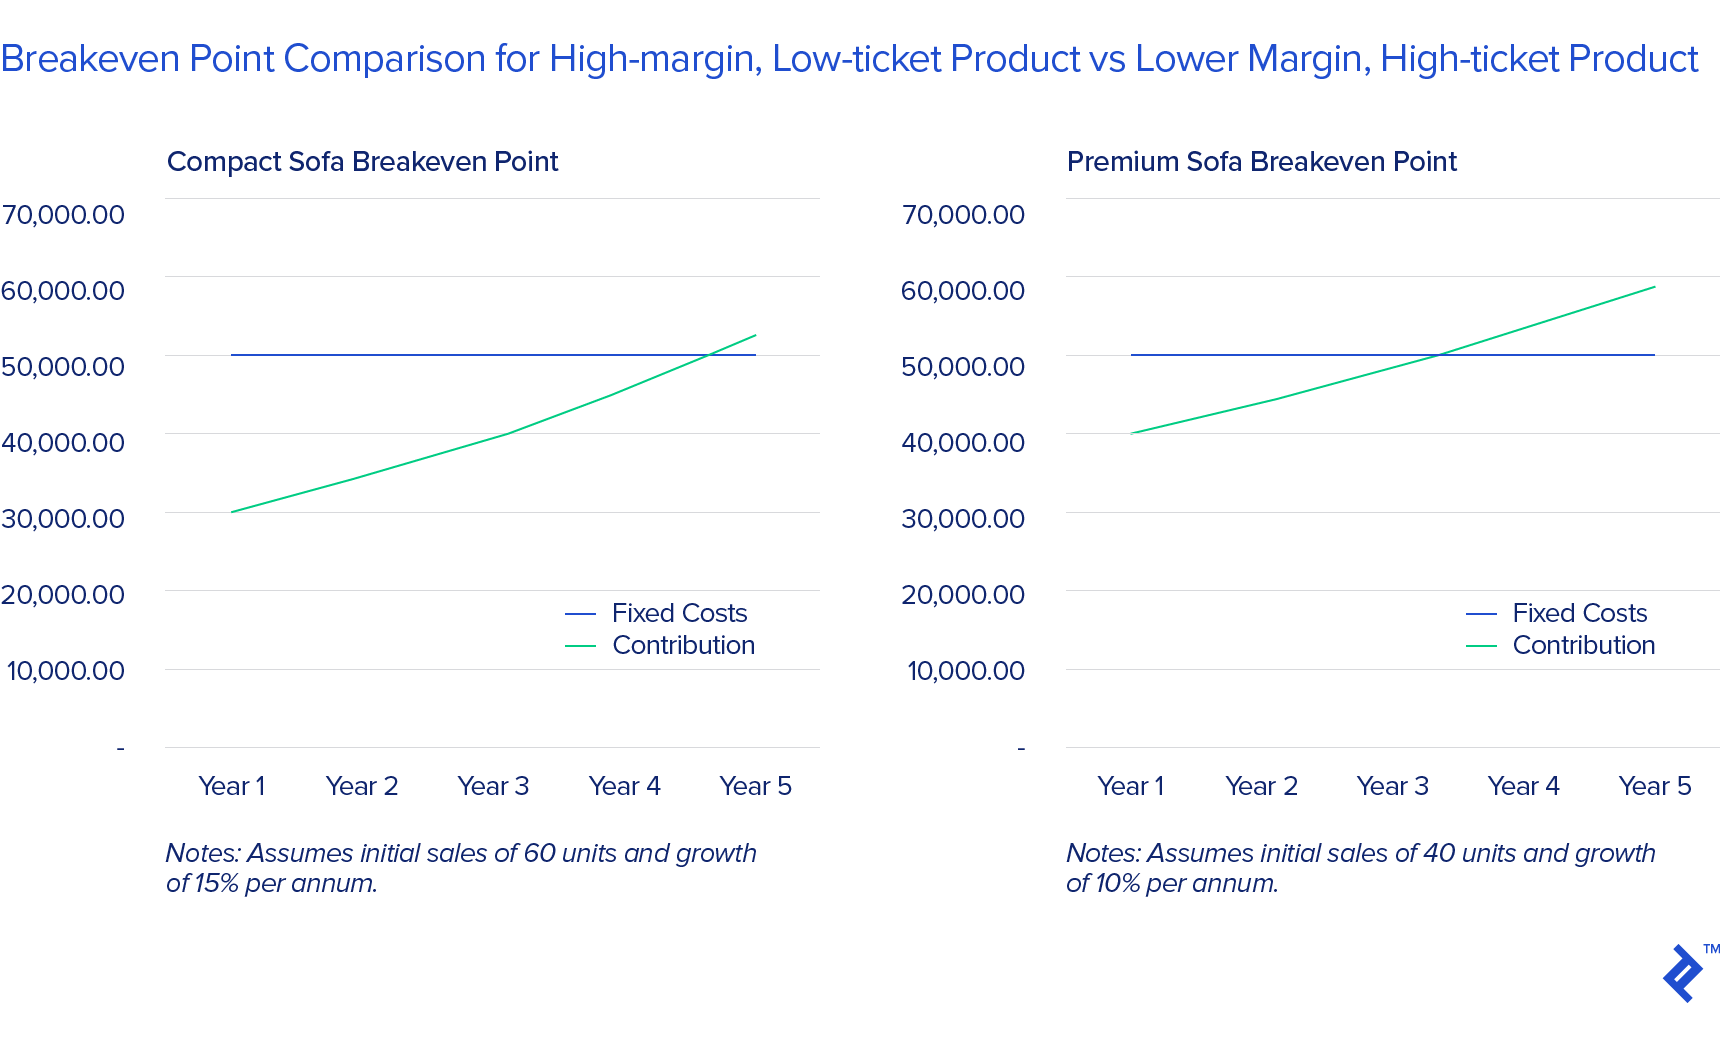 Side by side charts showing the breakeven point comparison for high-margin, low ticket products versus lower-margin, high ticket products